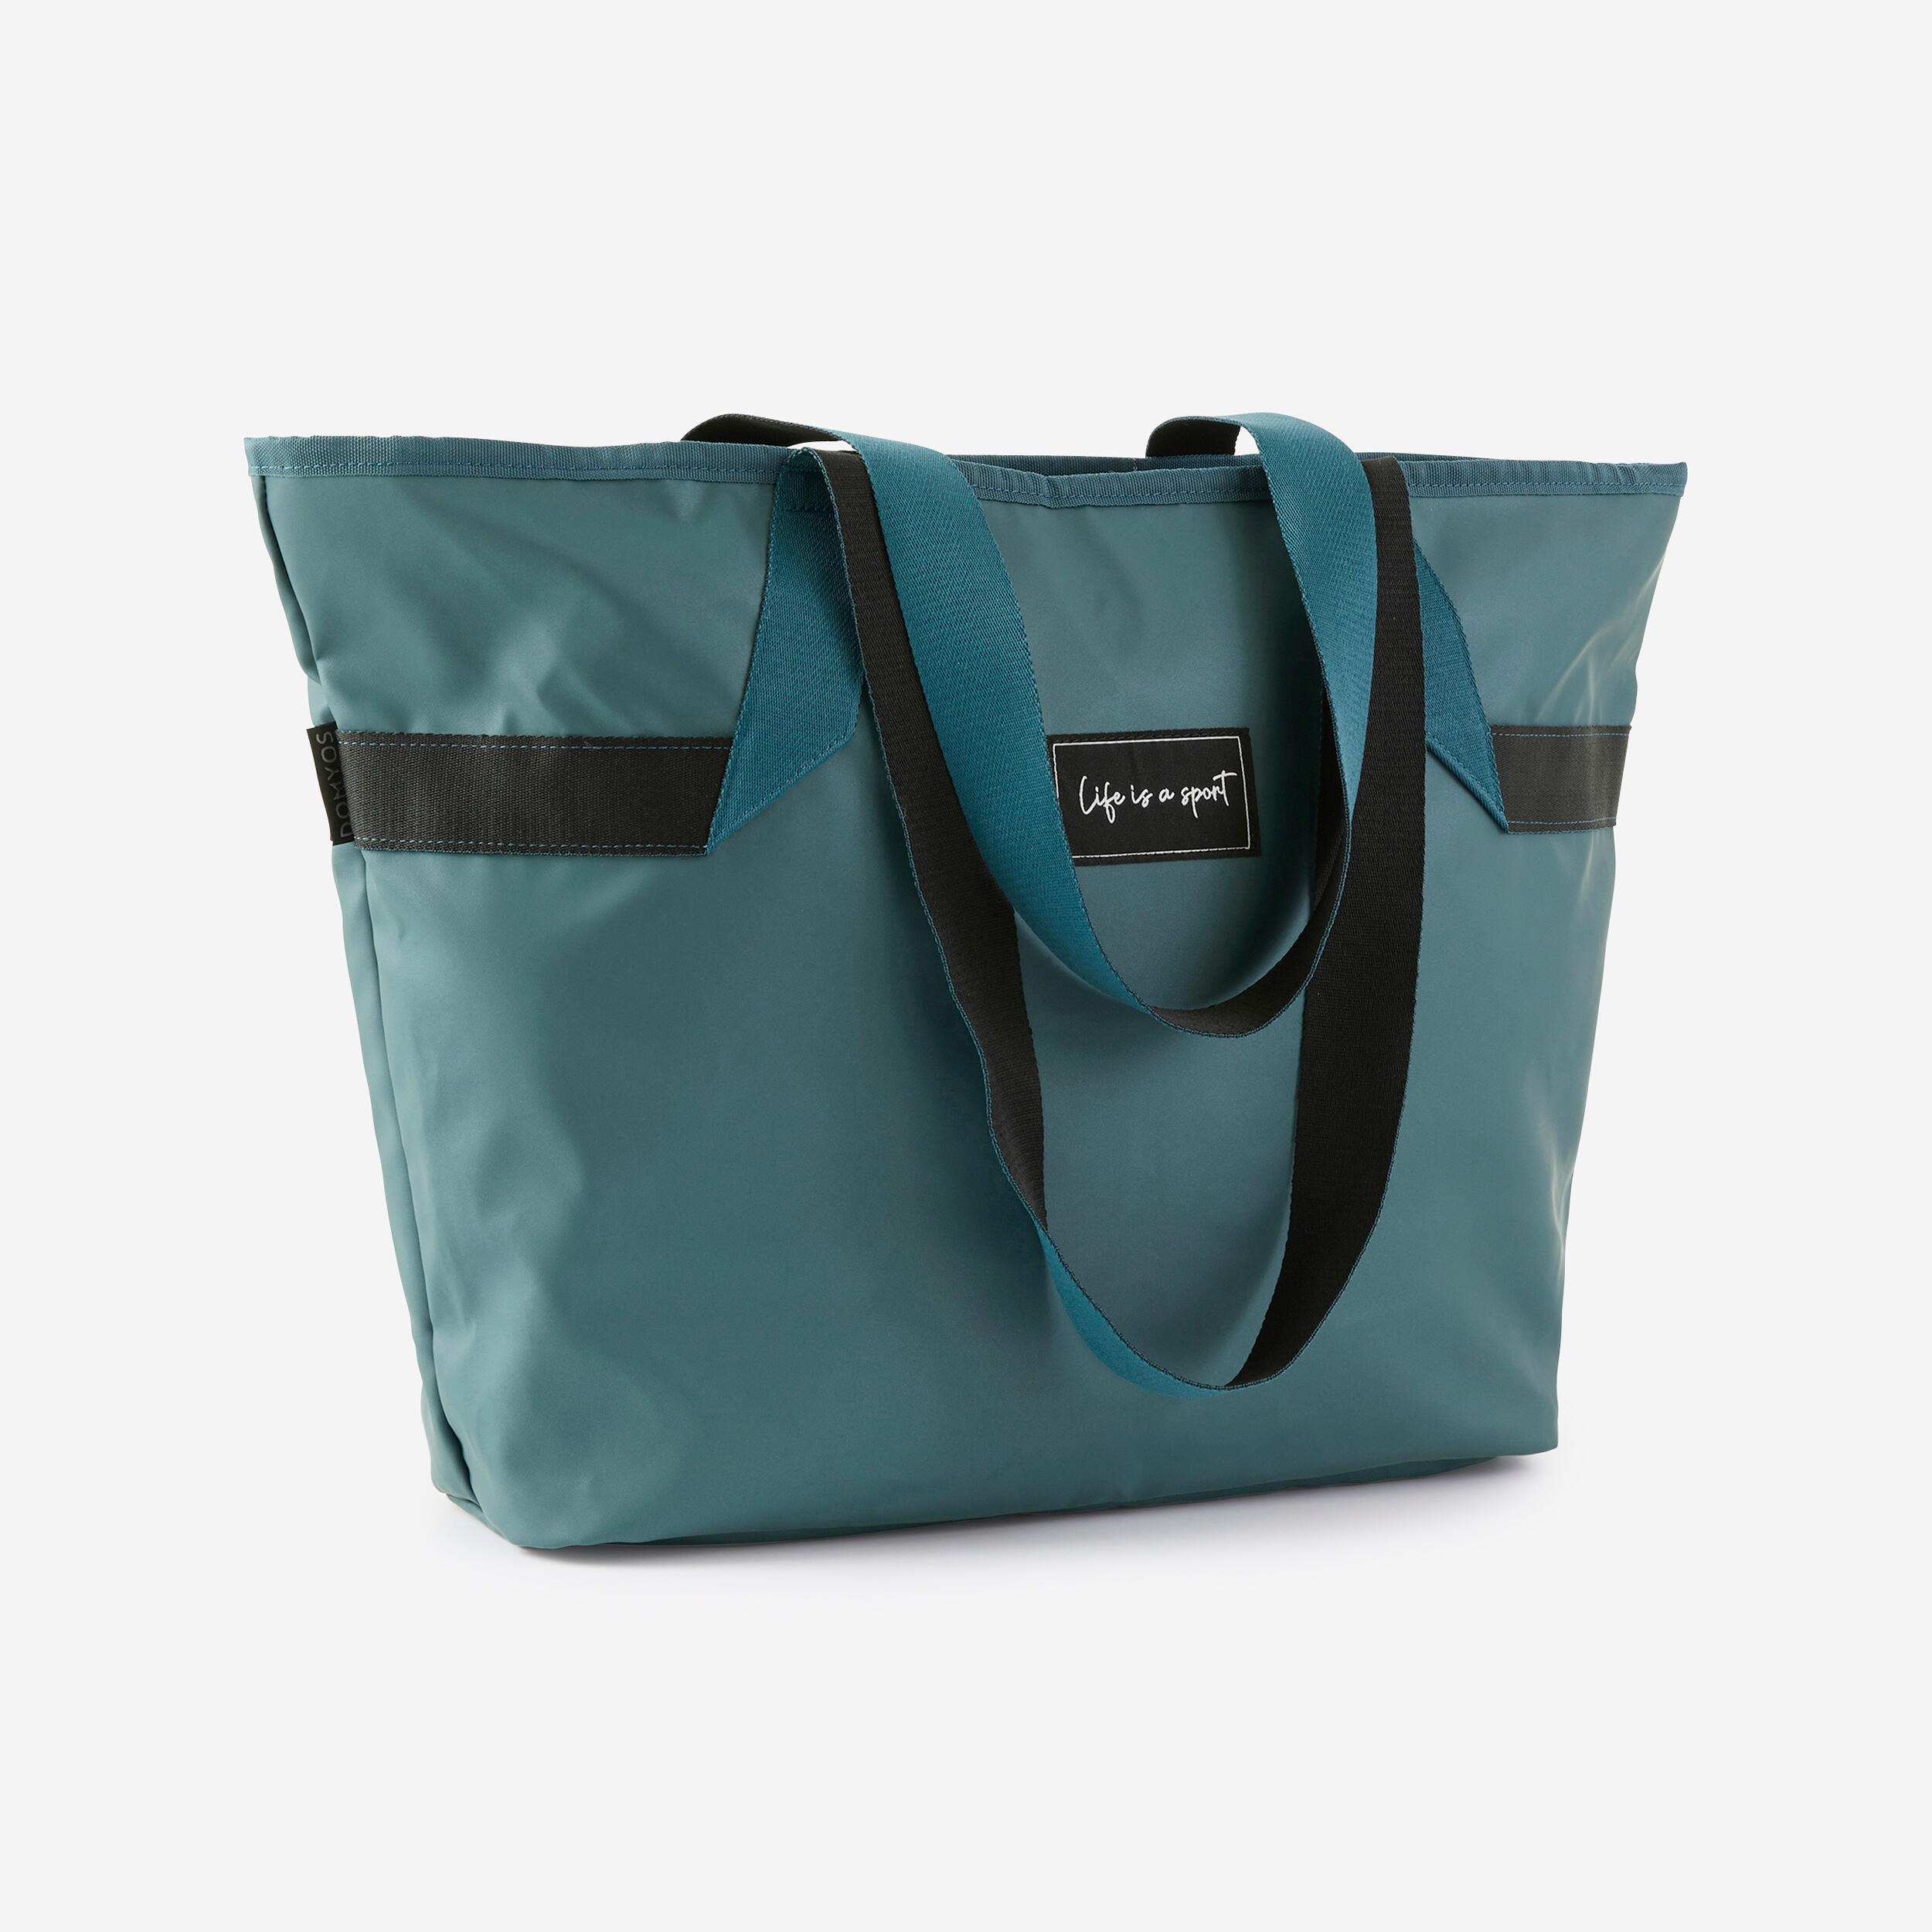 Women's 25 L Bag with Pockets - Turquoise 2/9